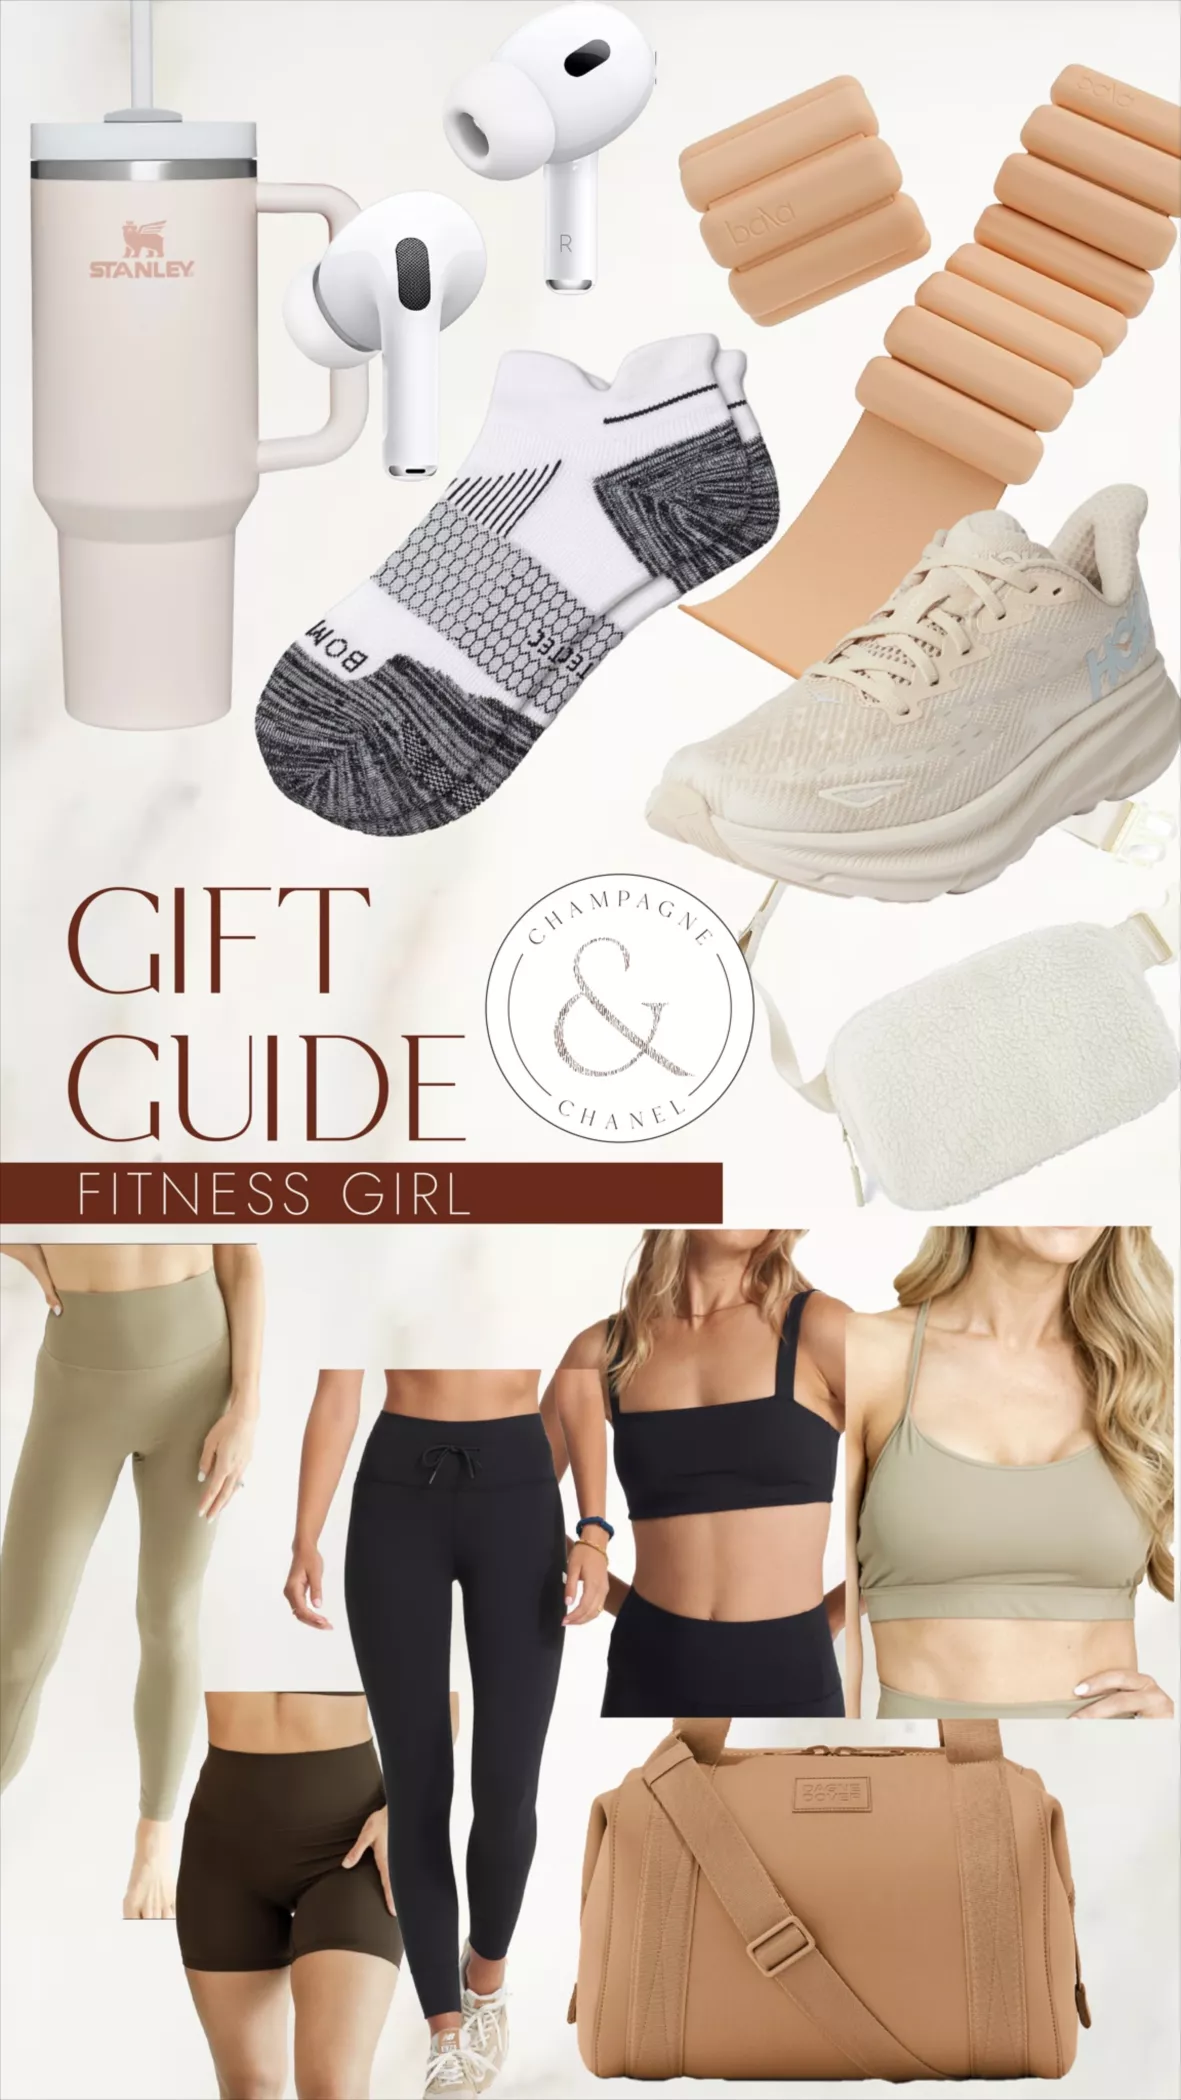 Girlfriend Workout Look – Champagne & Chanel